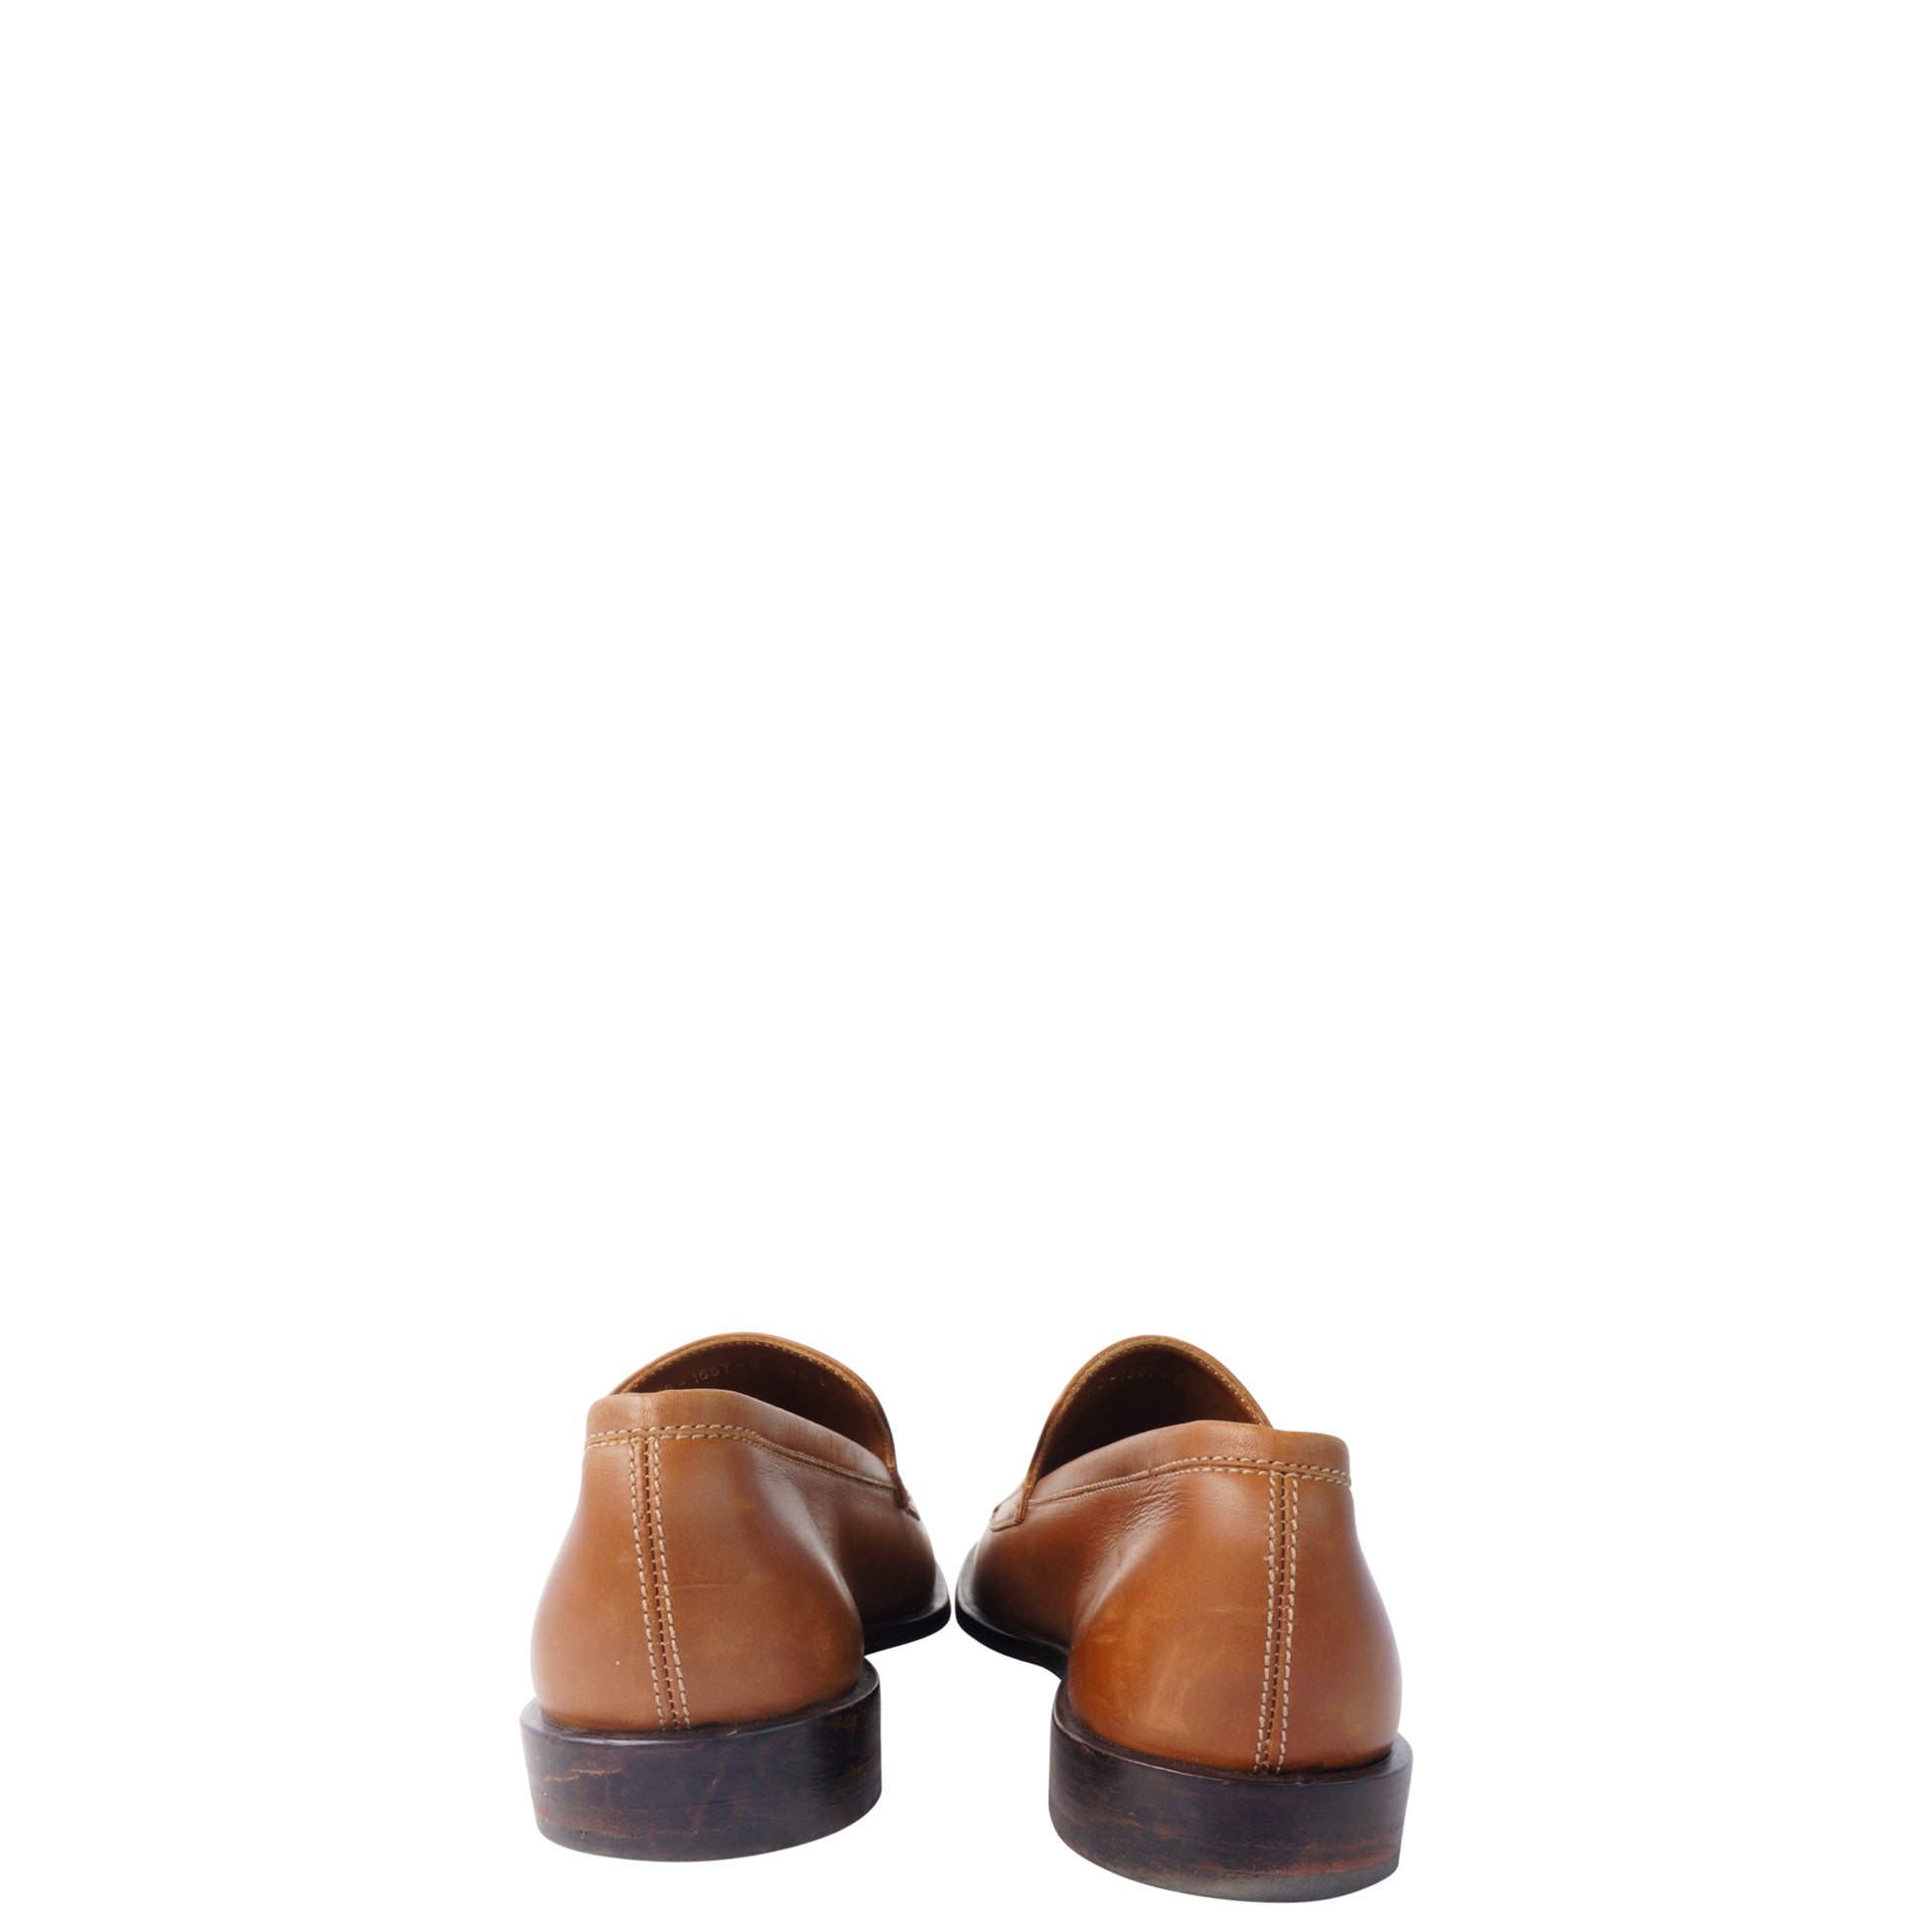 GUCCI GG LEATHER SLIP-ON LOAFERS - leefluxury.com